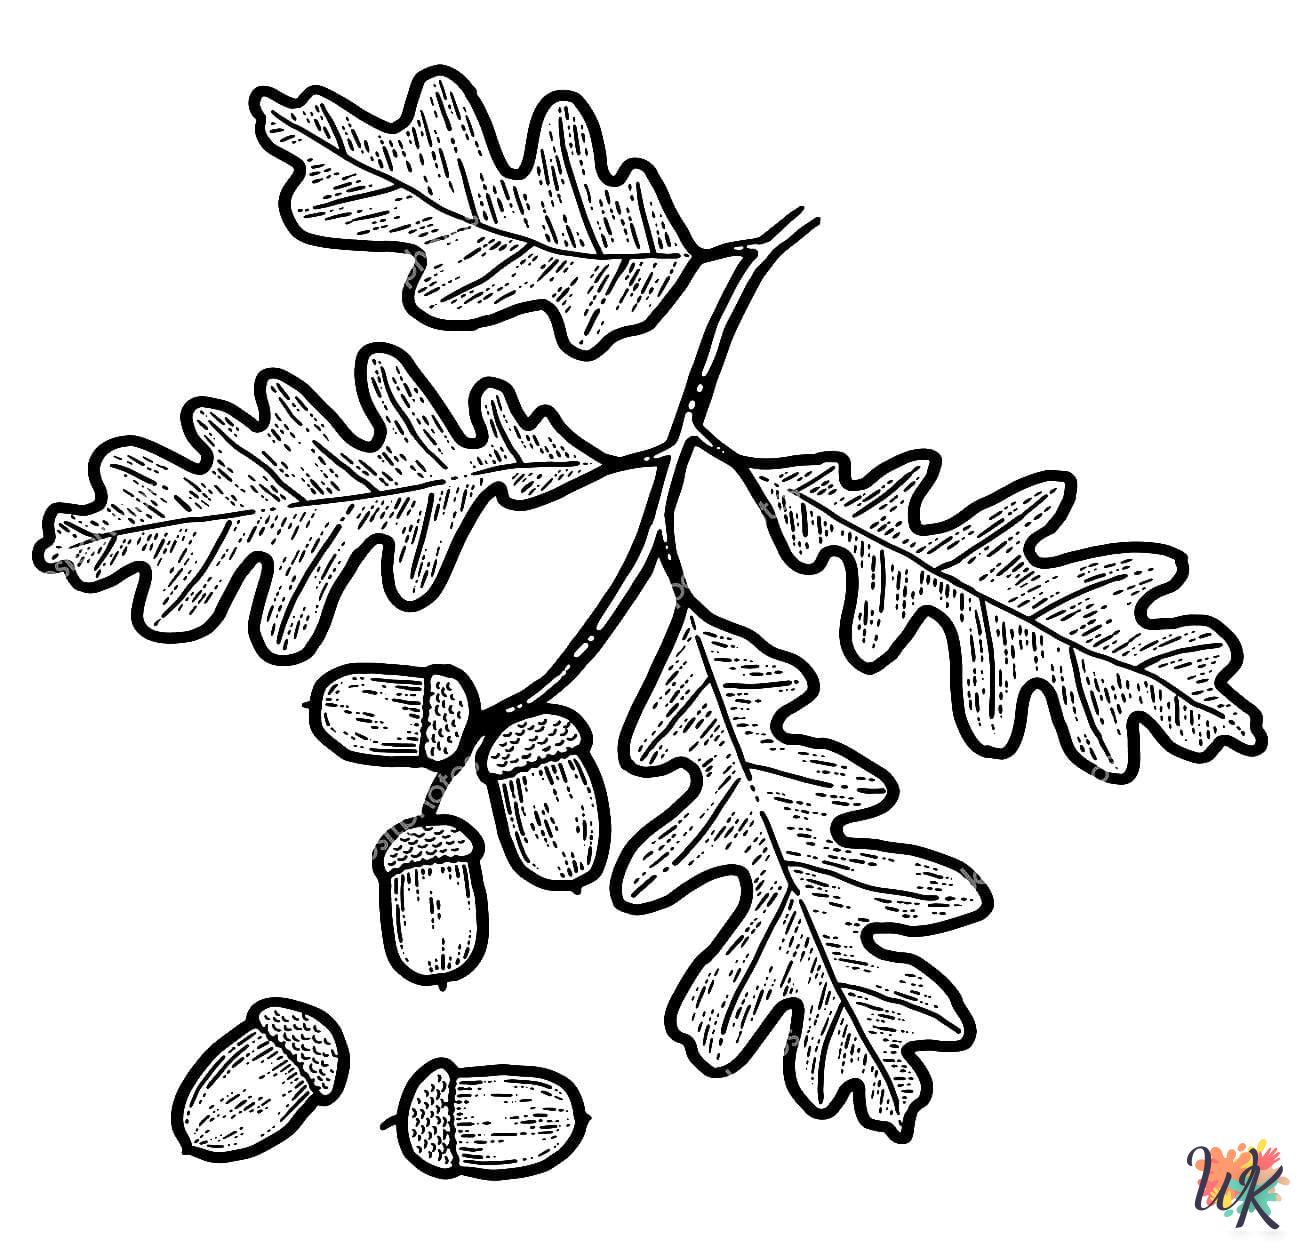 preschool Fall Leaves coloring pages